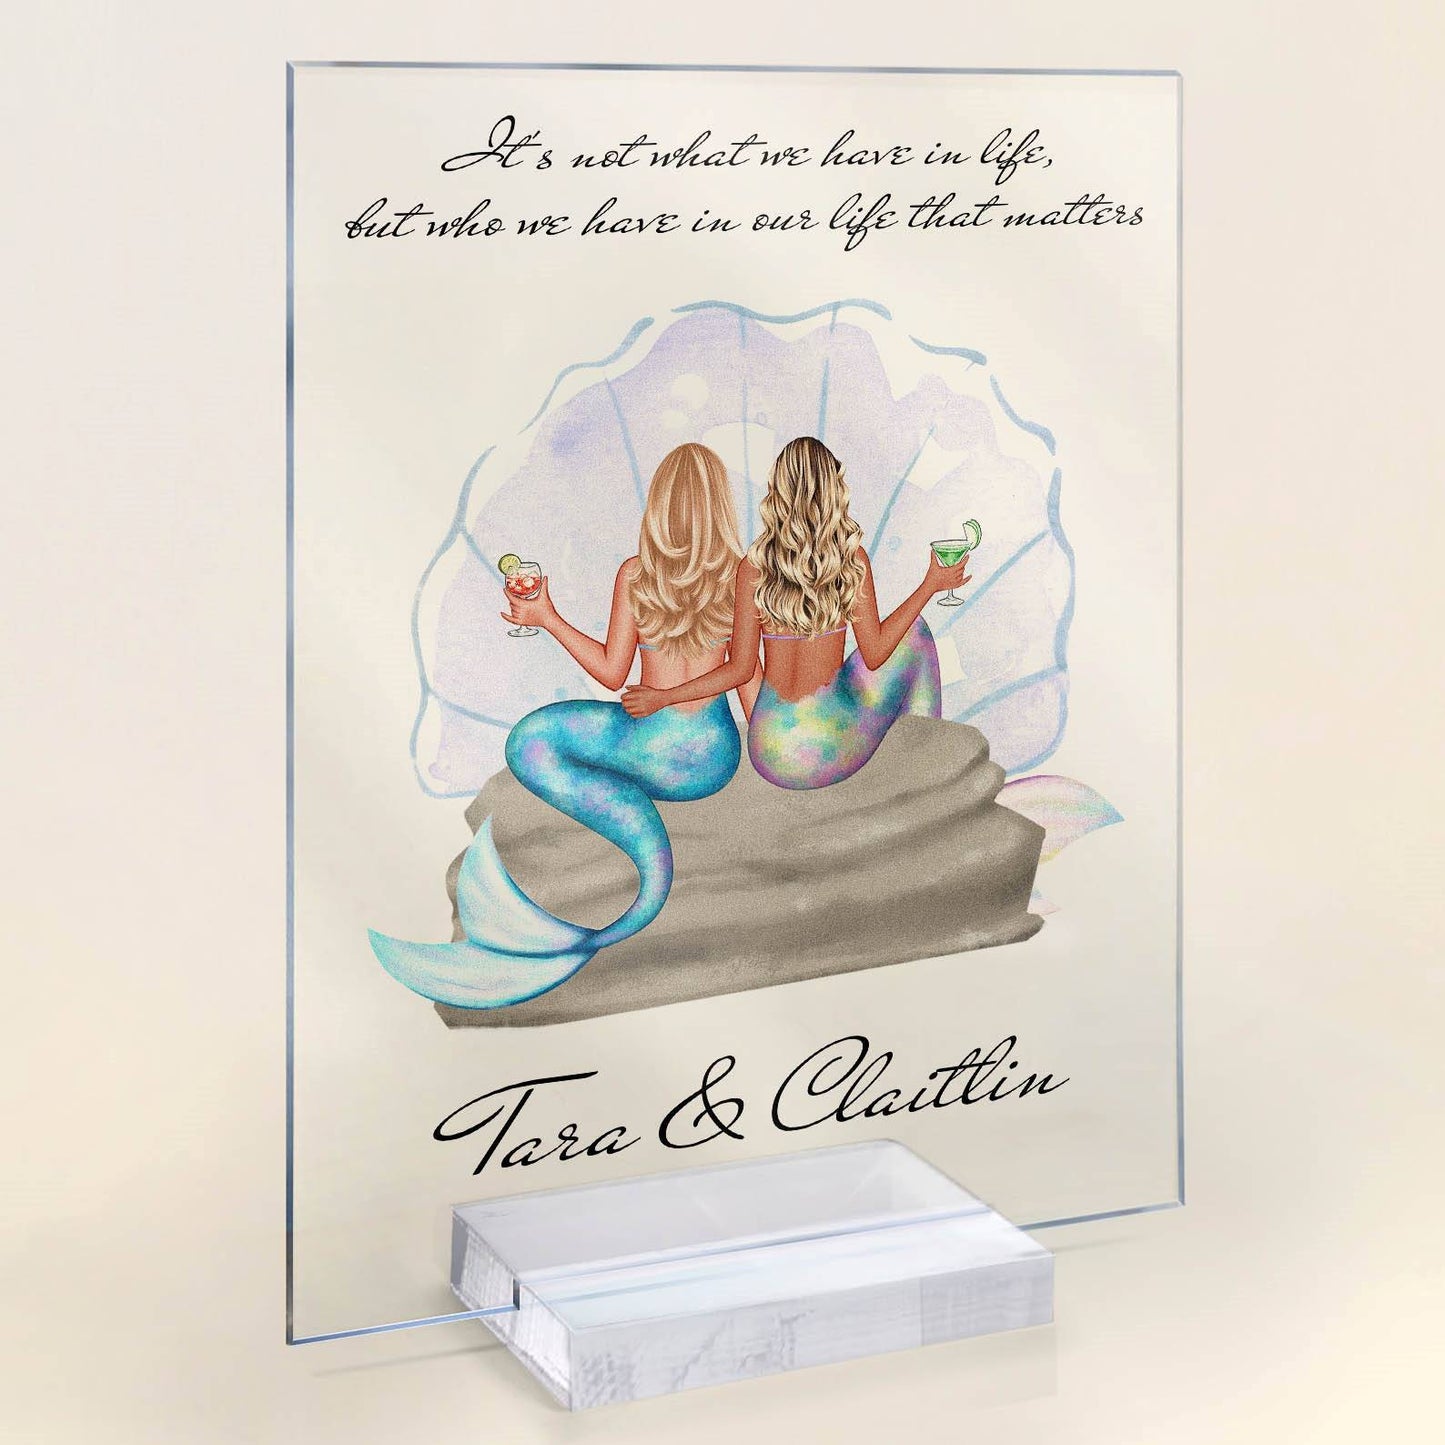 Who We Have In Our Life That Matters - Personalized Acrylic Plaque - Gift For Girls, Mermaid Sisters, Friends